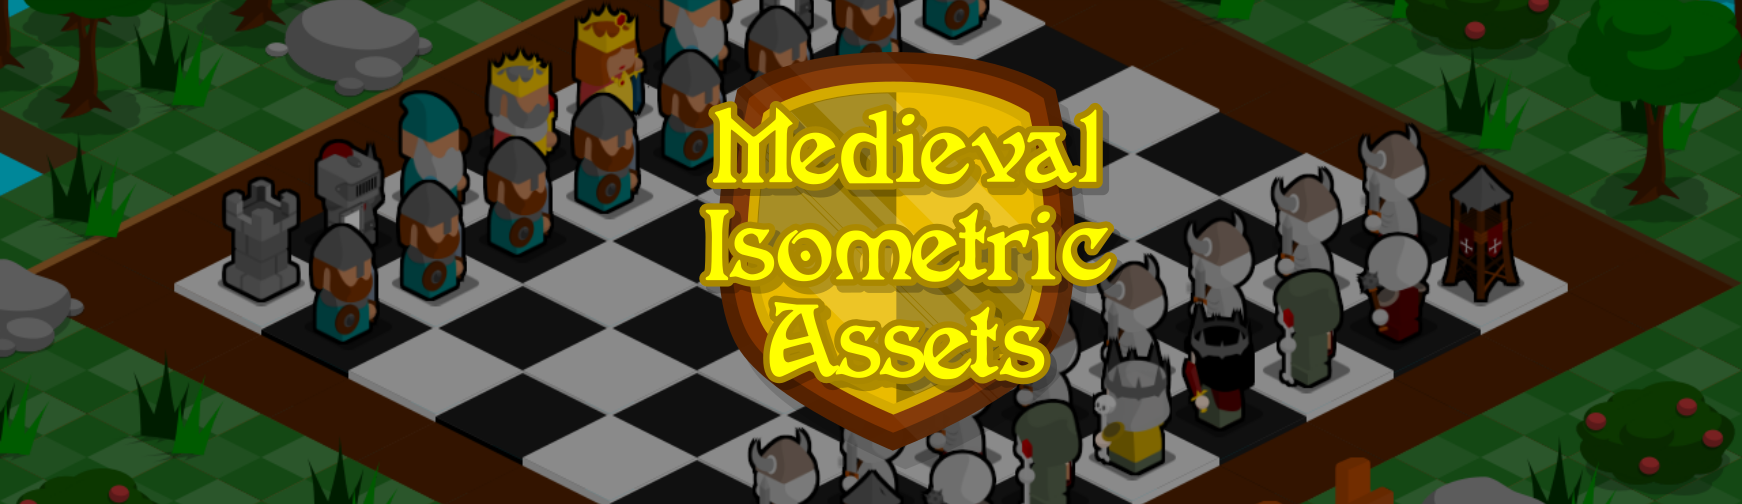 Medieval Isometric Assets